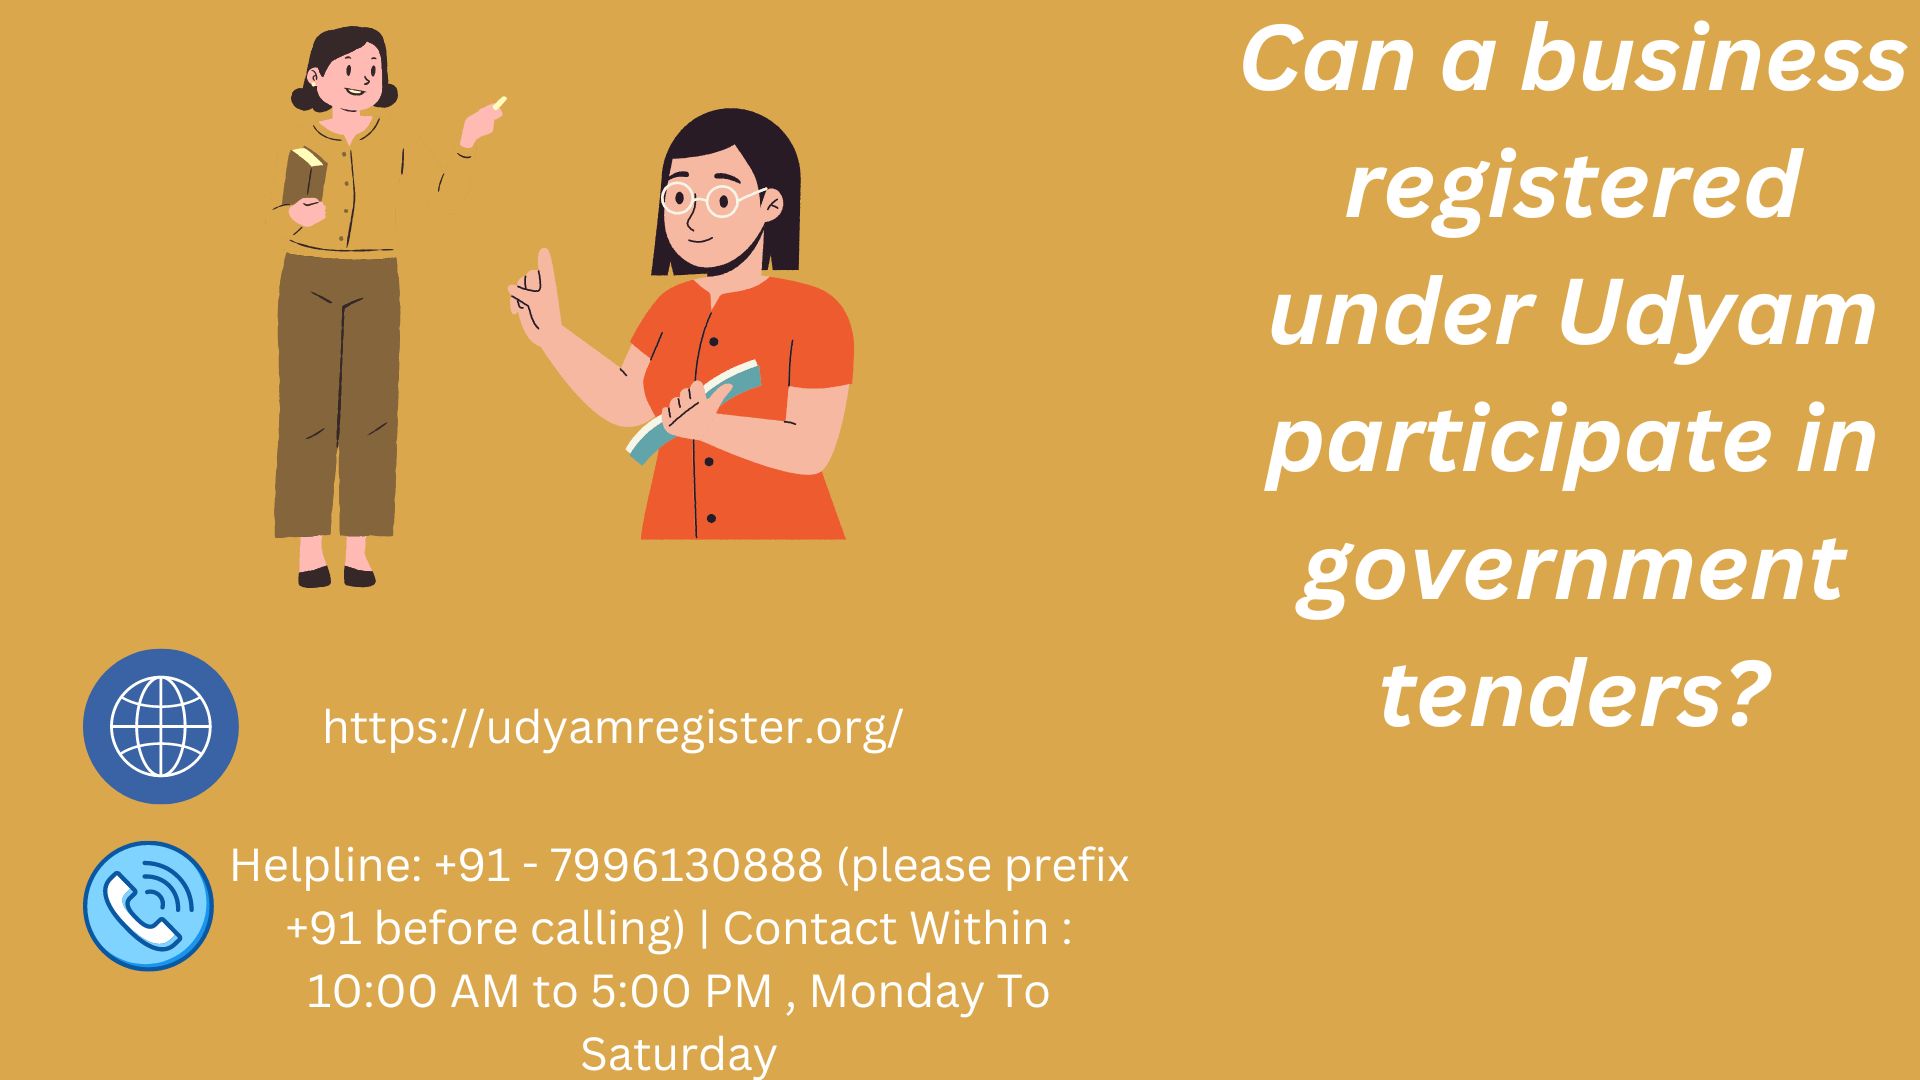 Can a business registered under Udyam participate in government tenders?